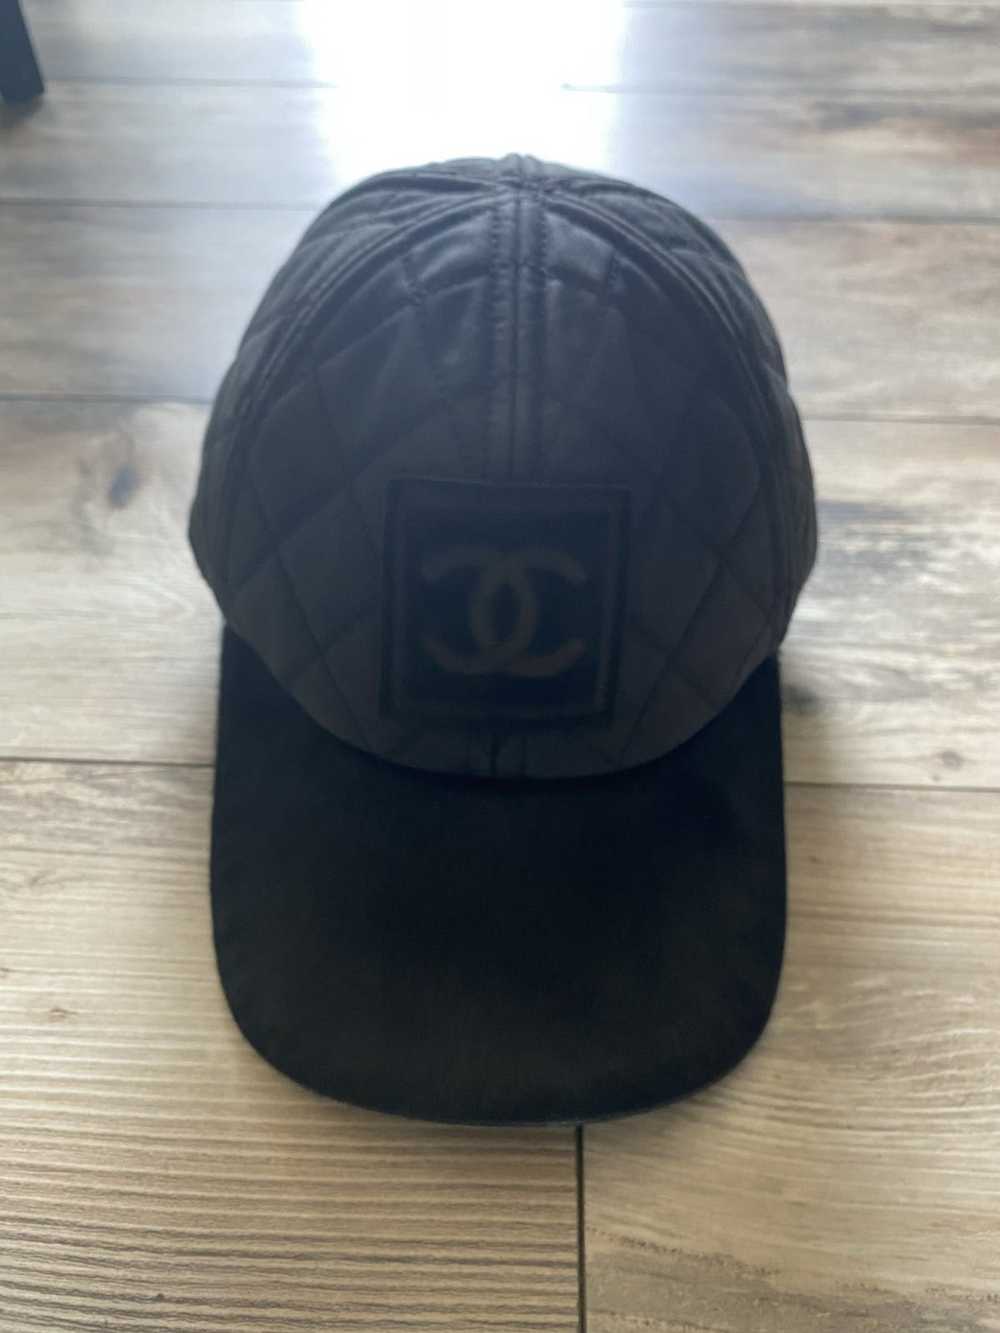 Chanel Chanel Pony Quilted Pony Hair hat - image 3